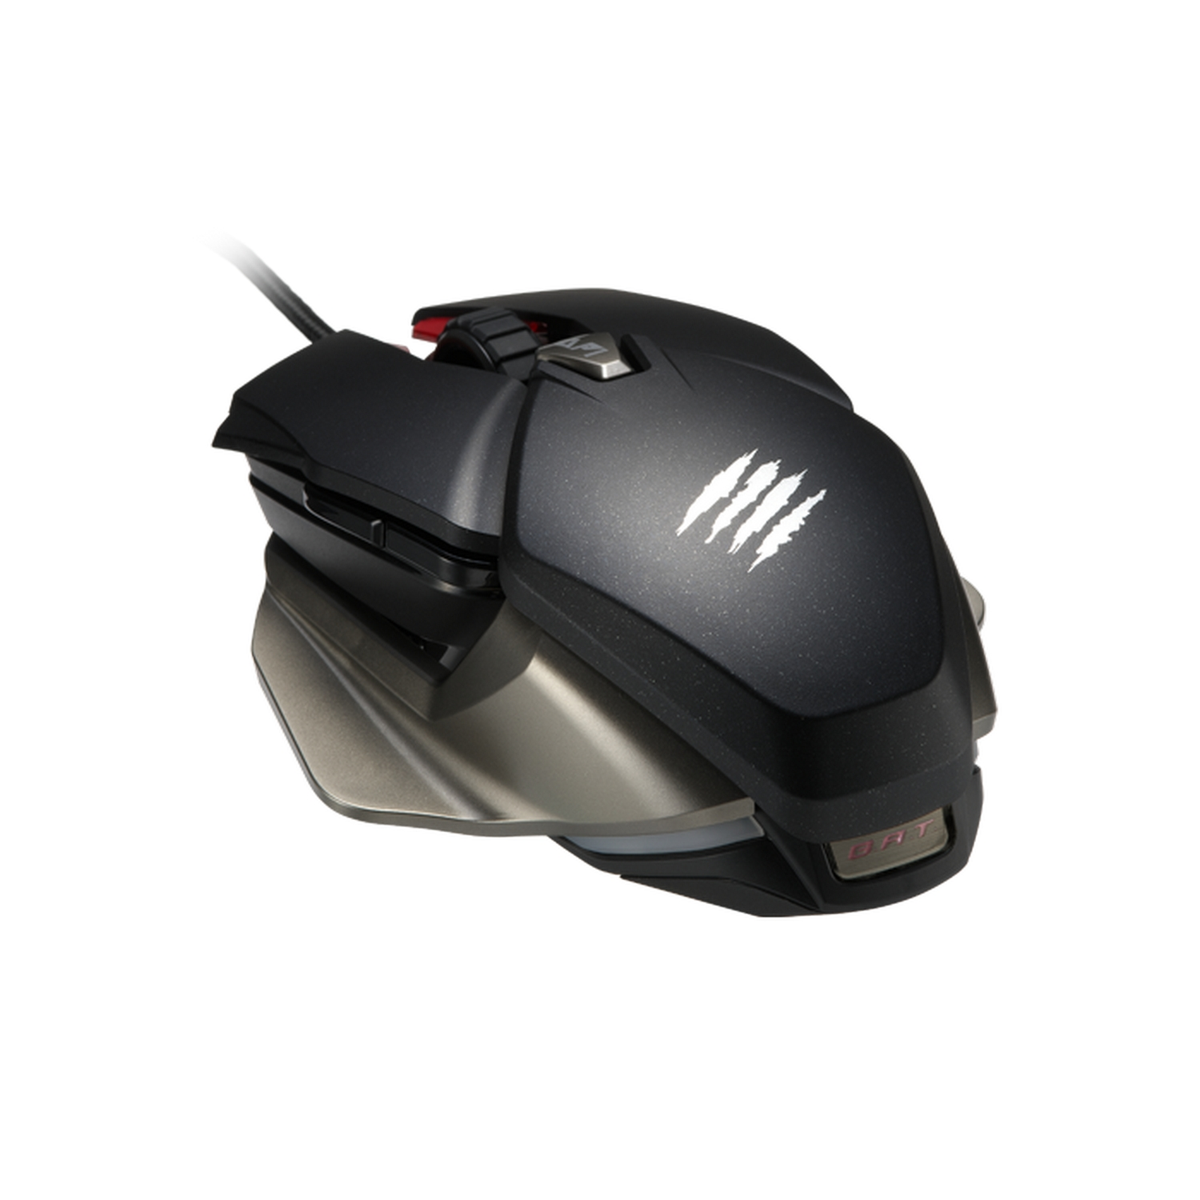 Gaming B.A.T. Ambidextreous Mouse, Schwarz MAD Black 6+ Mouse, Gaming Performance CATZ